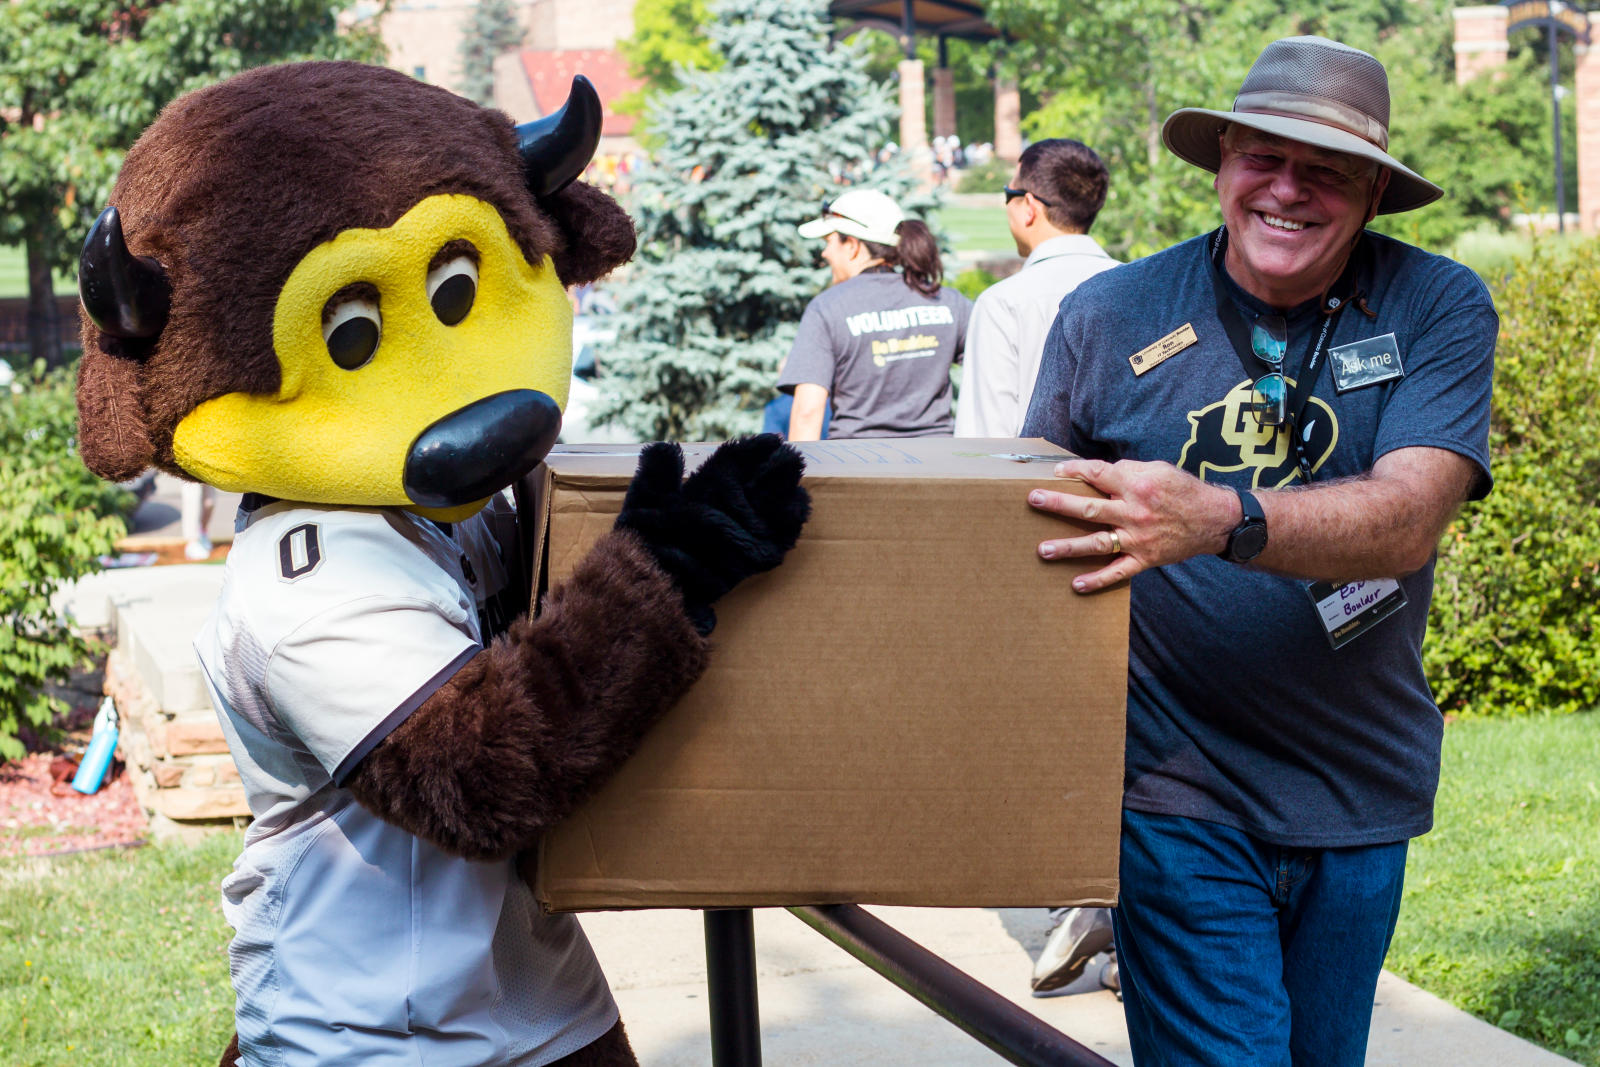 A person and Chip, the costumed mascot, carry a cardboard box together.